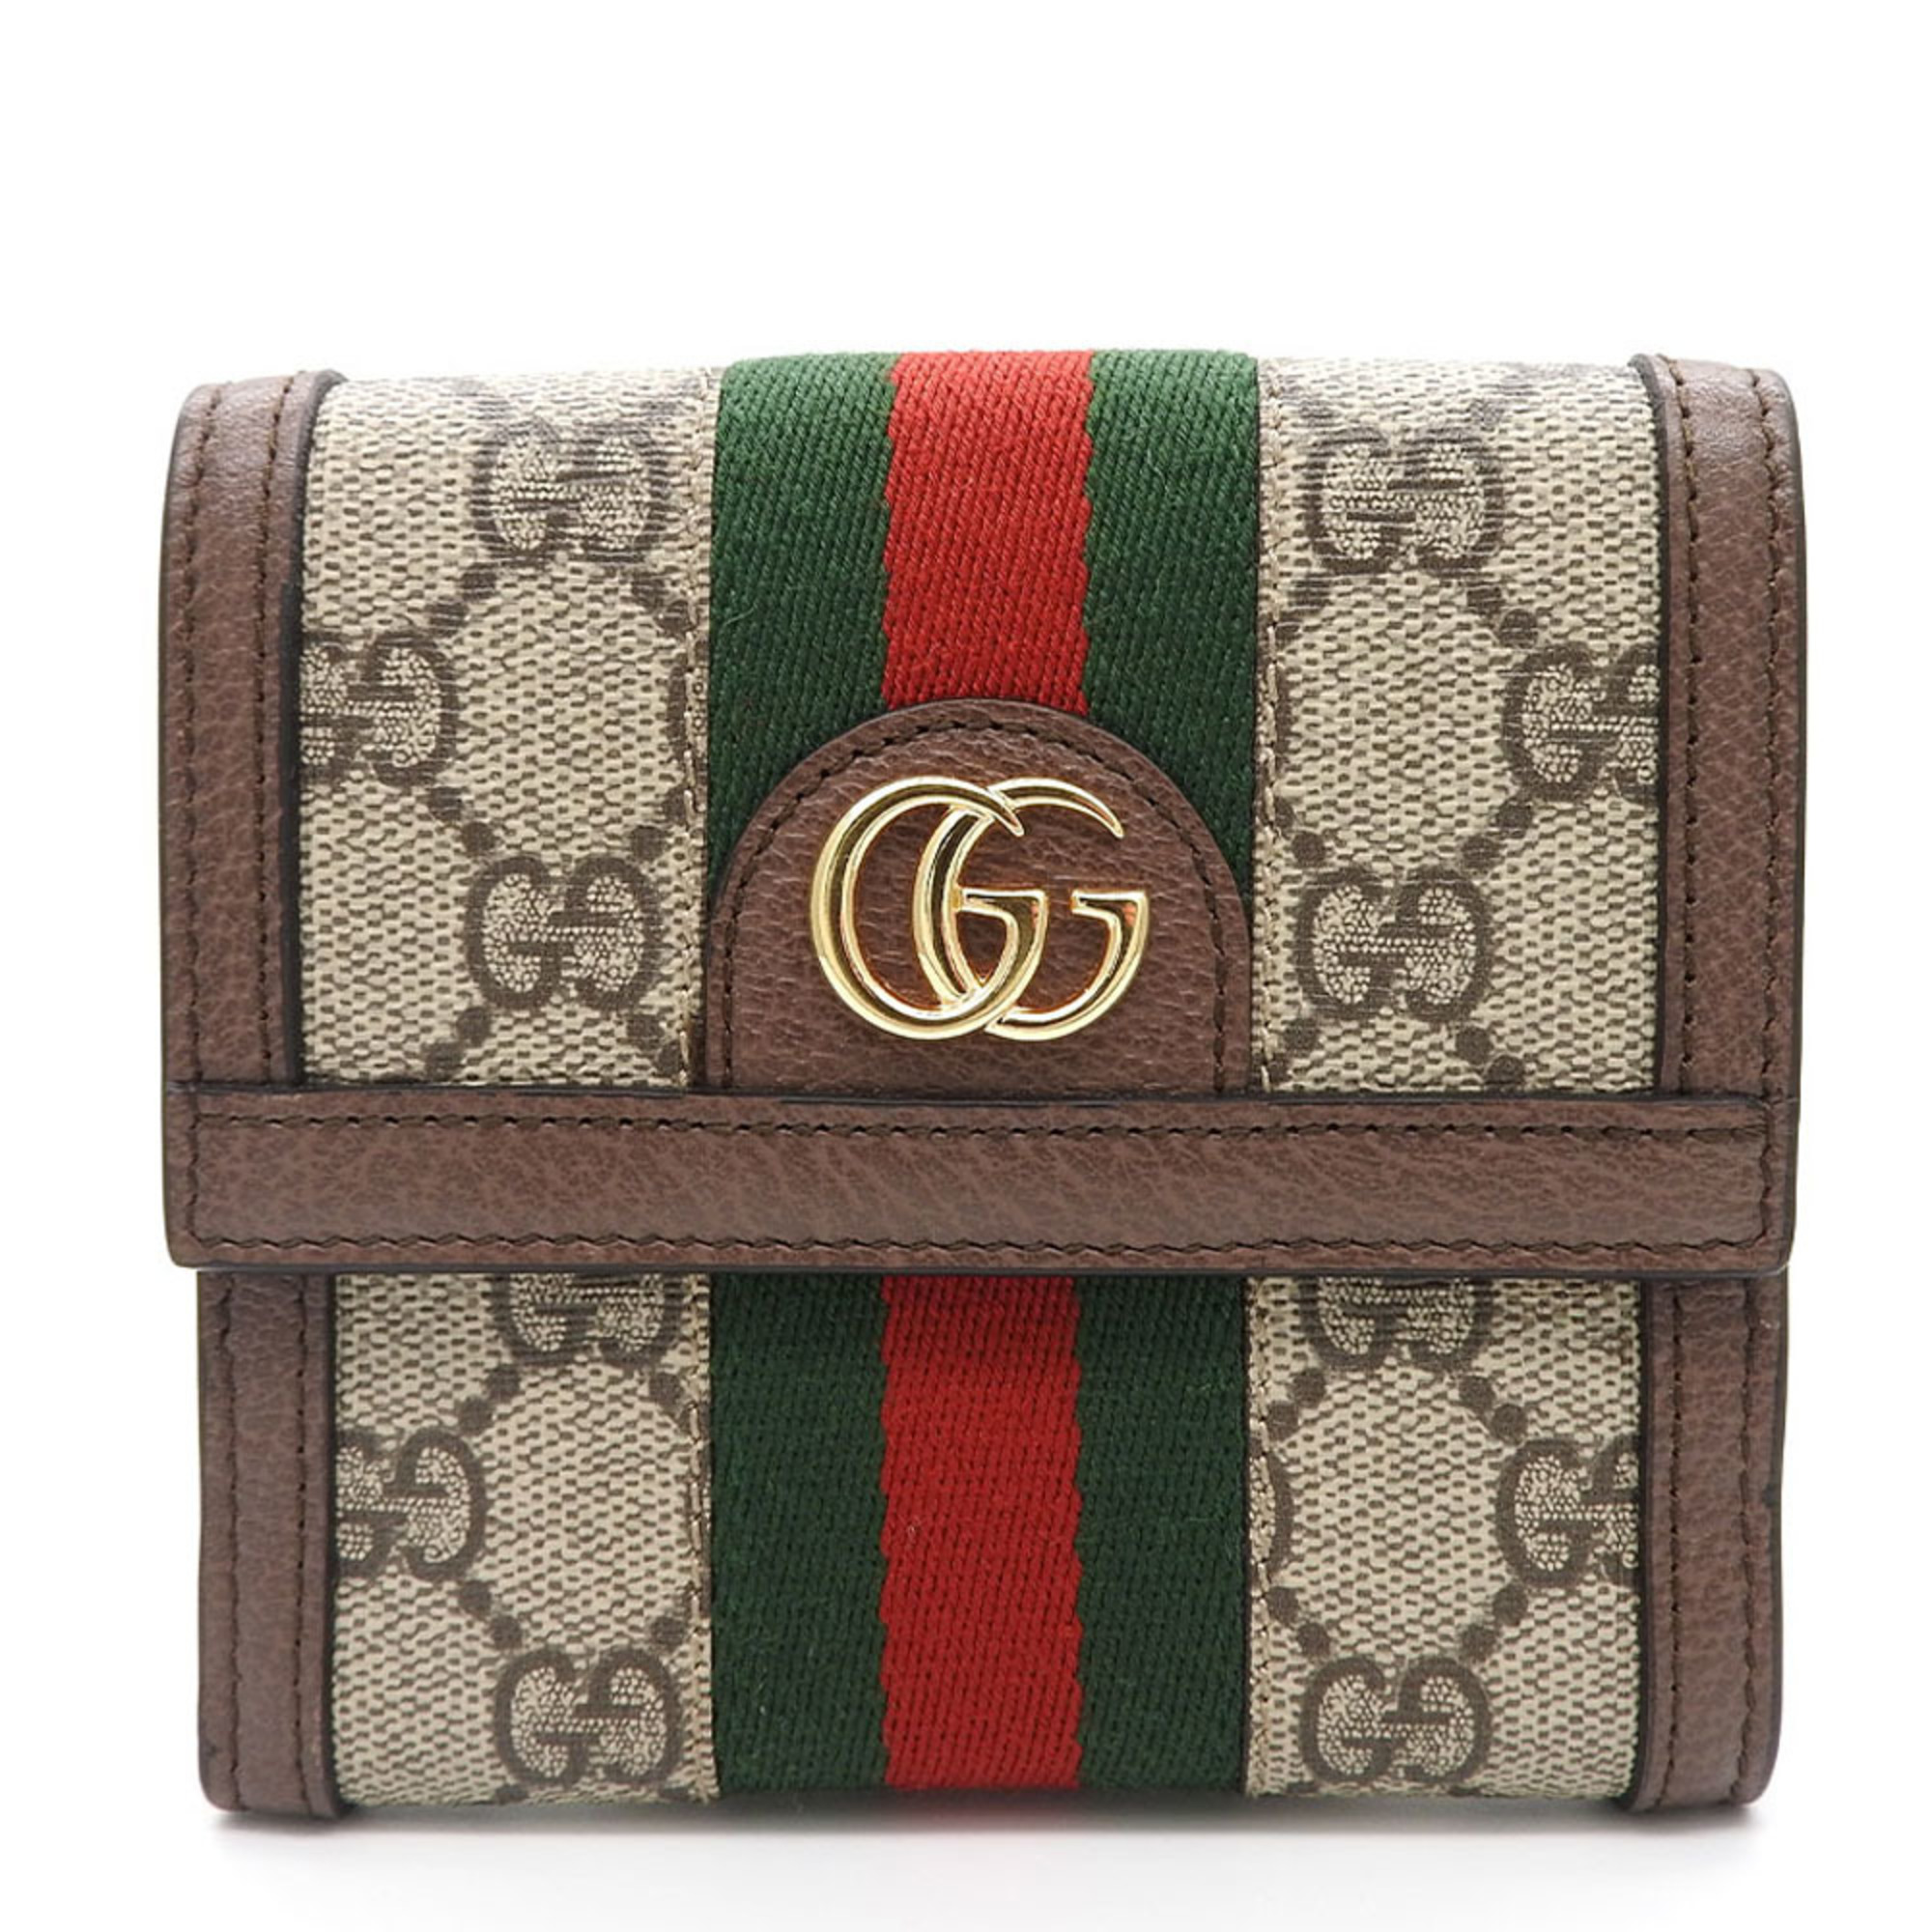 Gucci W Wallet Compact Offdia Sherry Line GG Supreme 523173 Beige Red Green Leather Ladies Men's Unisex GUCCI wallet pvc